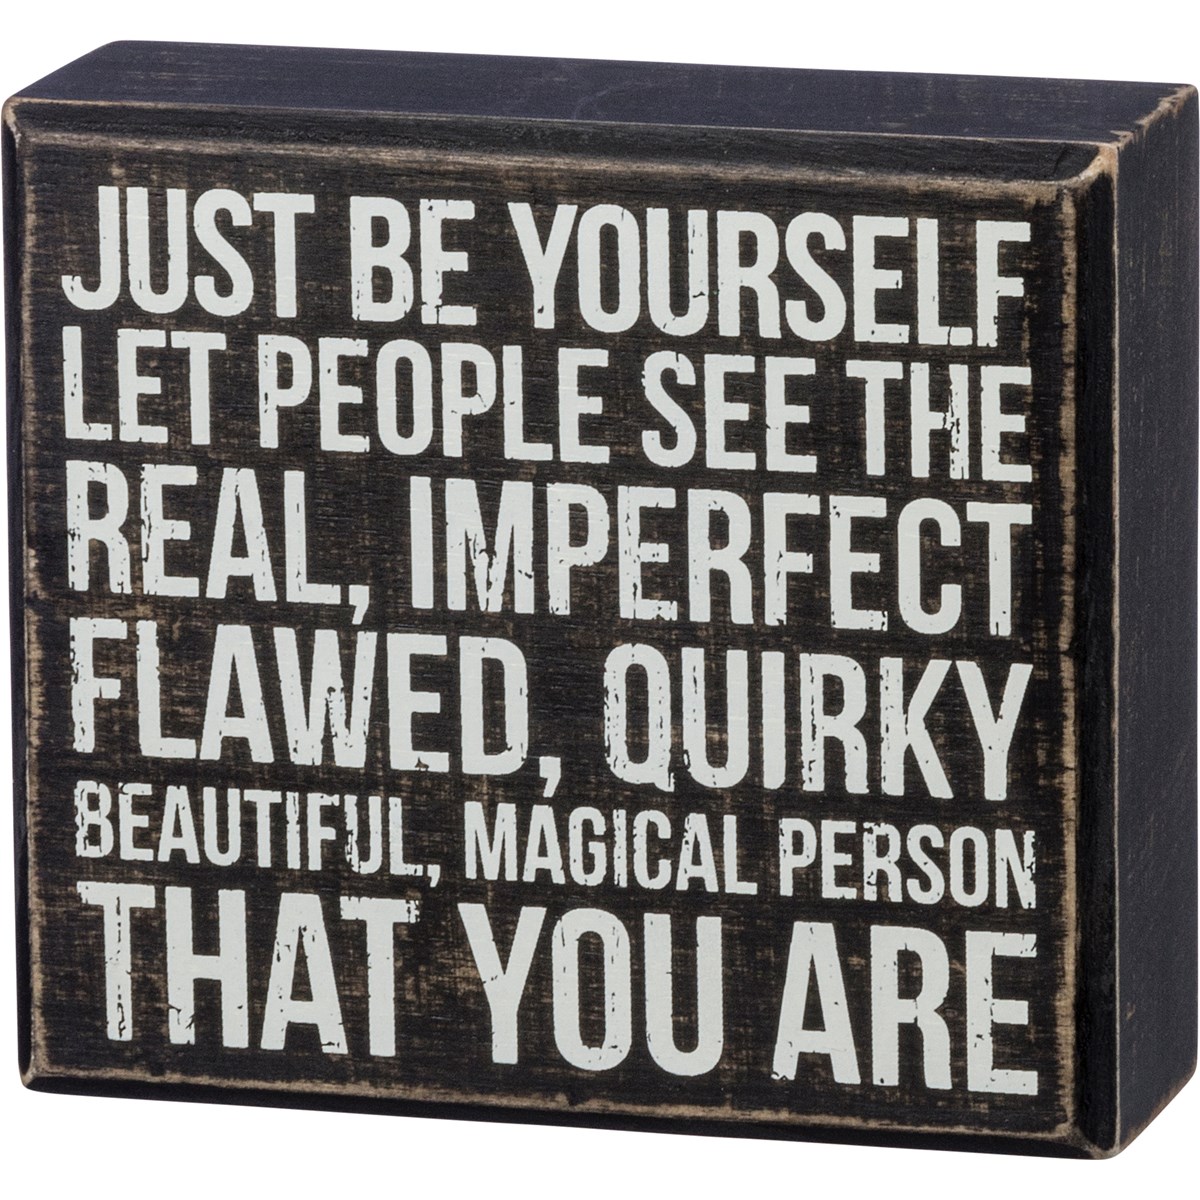 Box Sign - Just Be Yourself Let People See - 5" x 4.50" x 1.75" - Wood